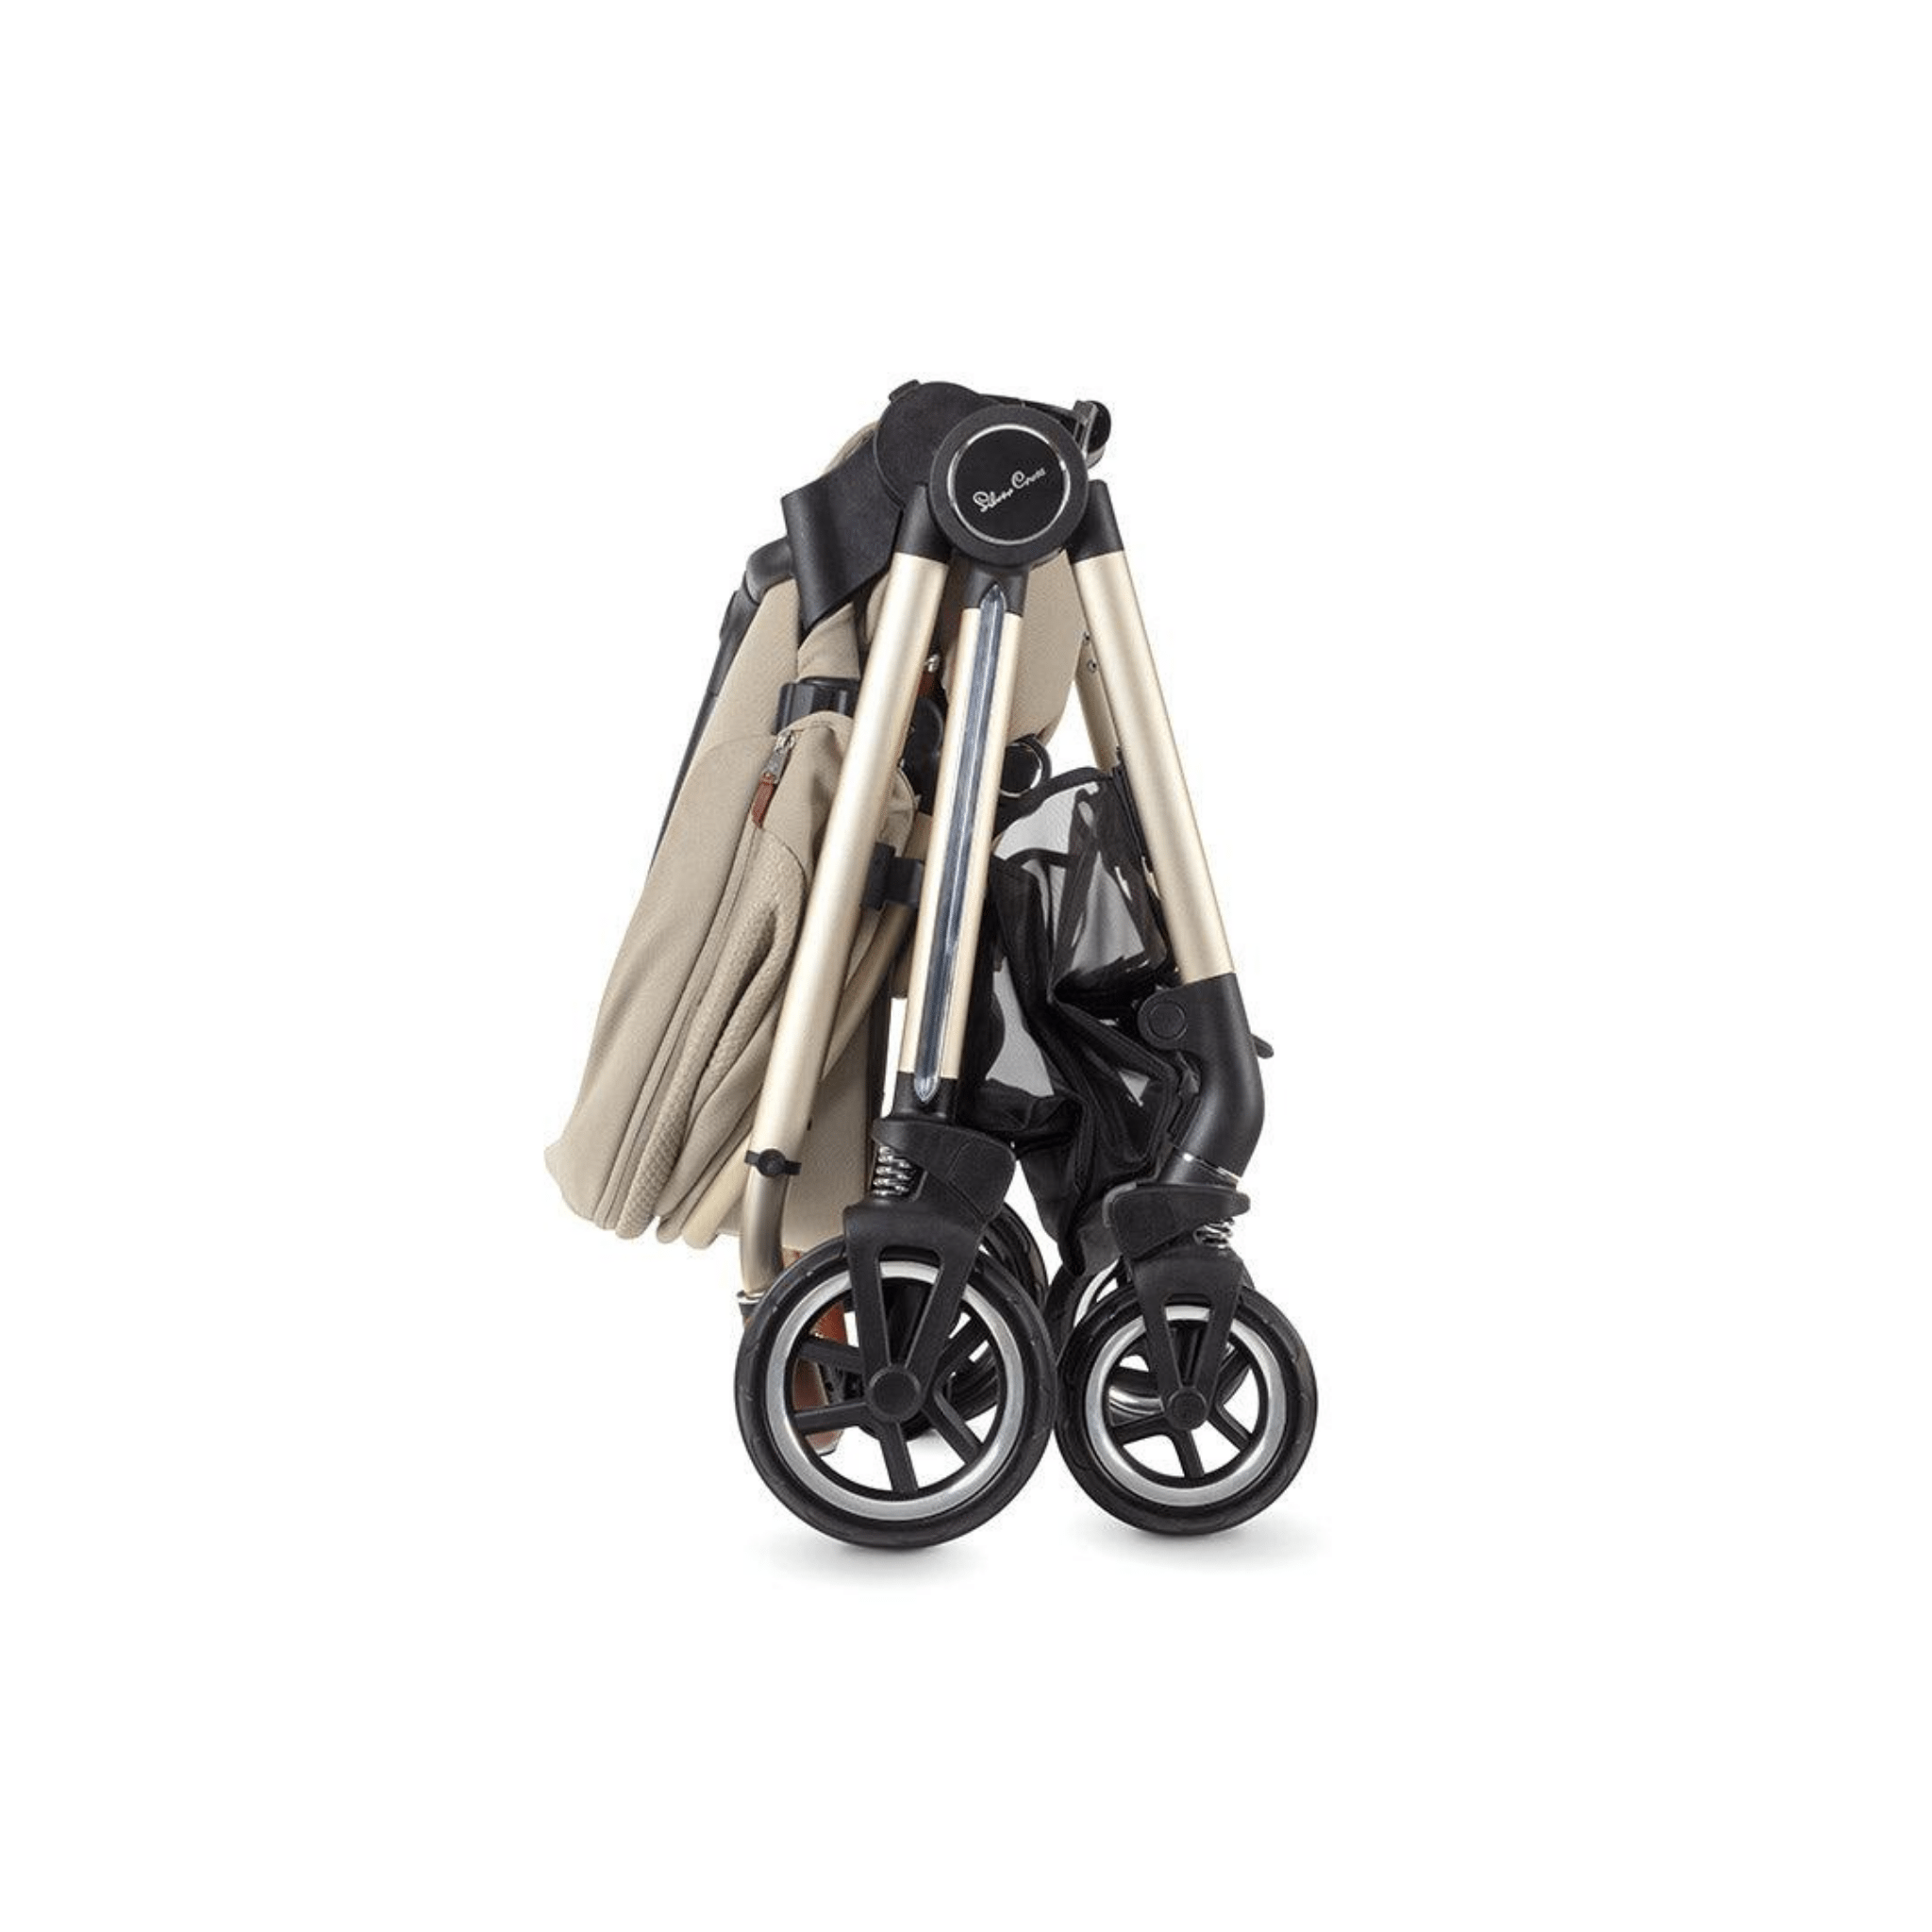 Silver Cross Dune Travel System with Folding Carrycot in Stone Travel Systems KTDT.ST3